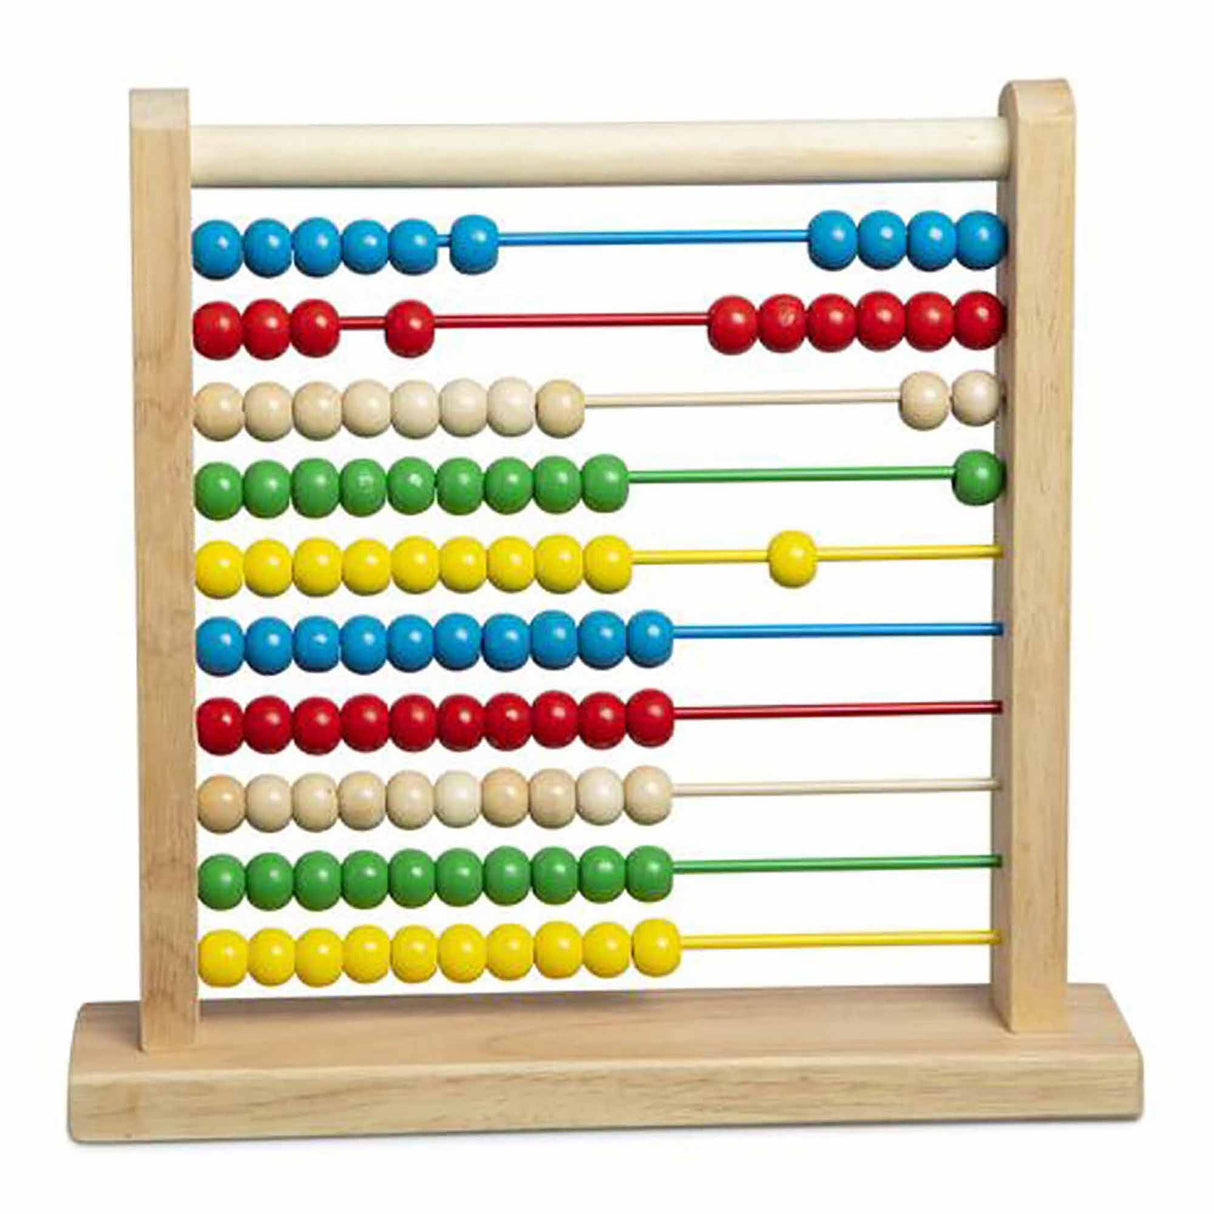 Melissa & Doug Classic Wooden Toy - Abacus